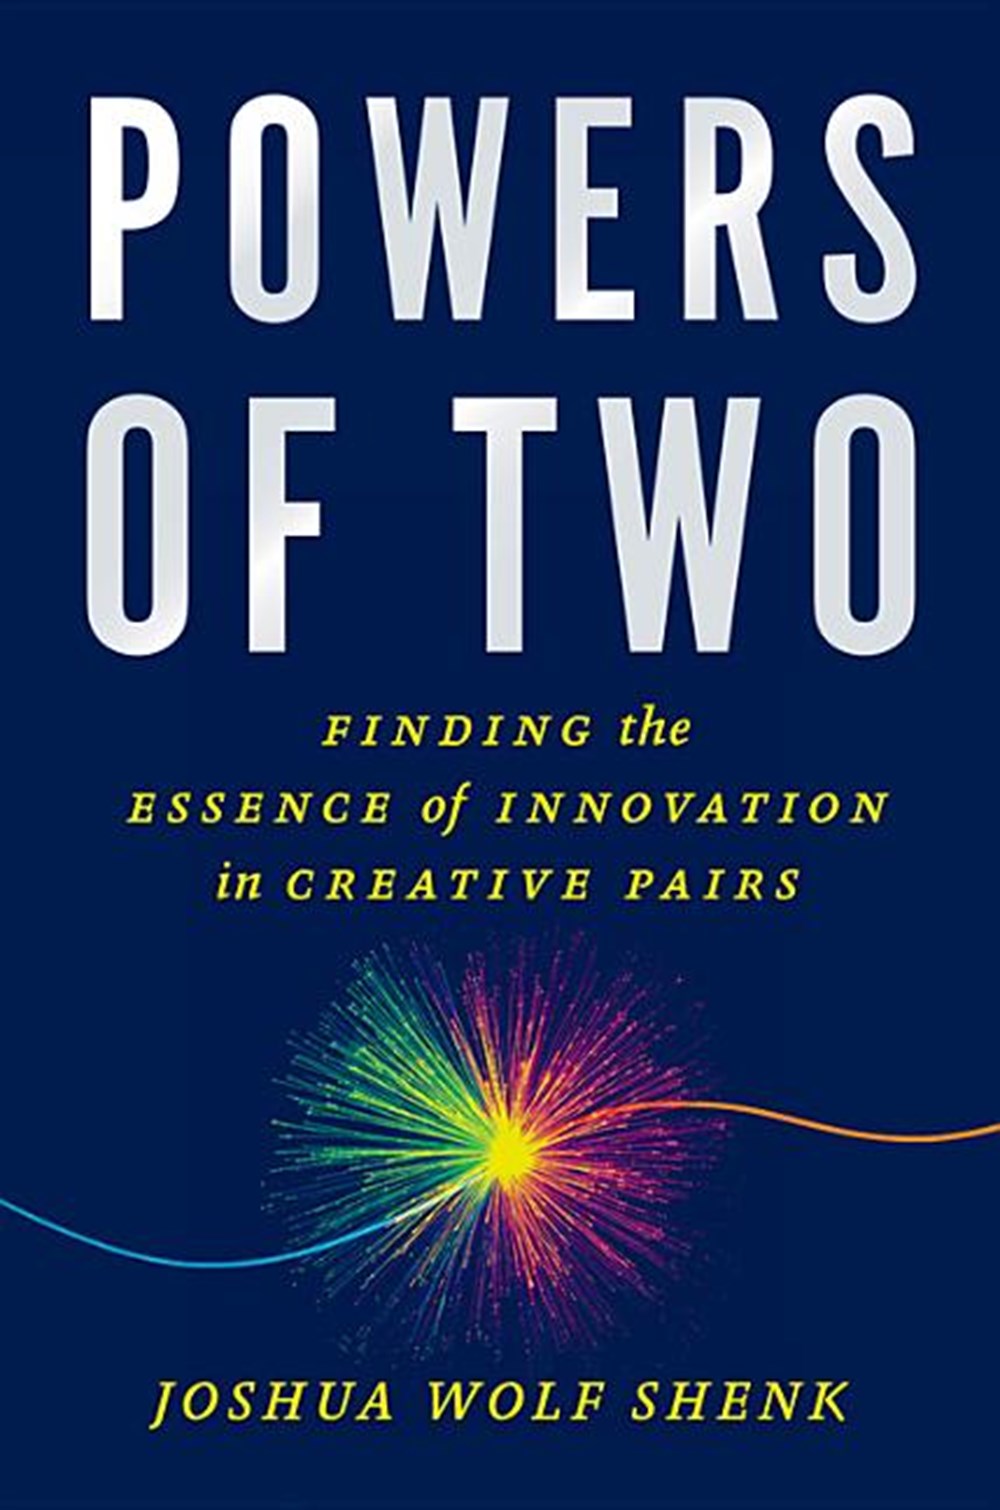 Powers of Two Finding the Essence of Innovation in Creative Pairs